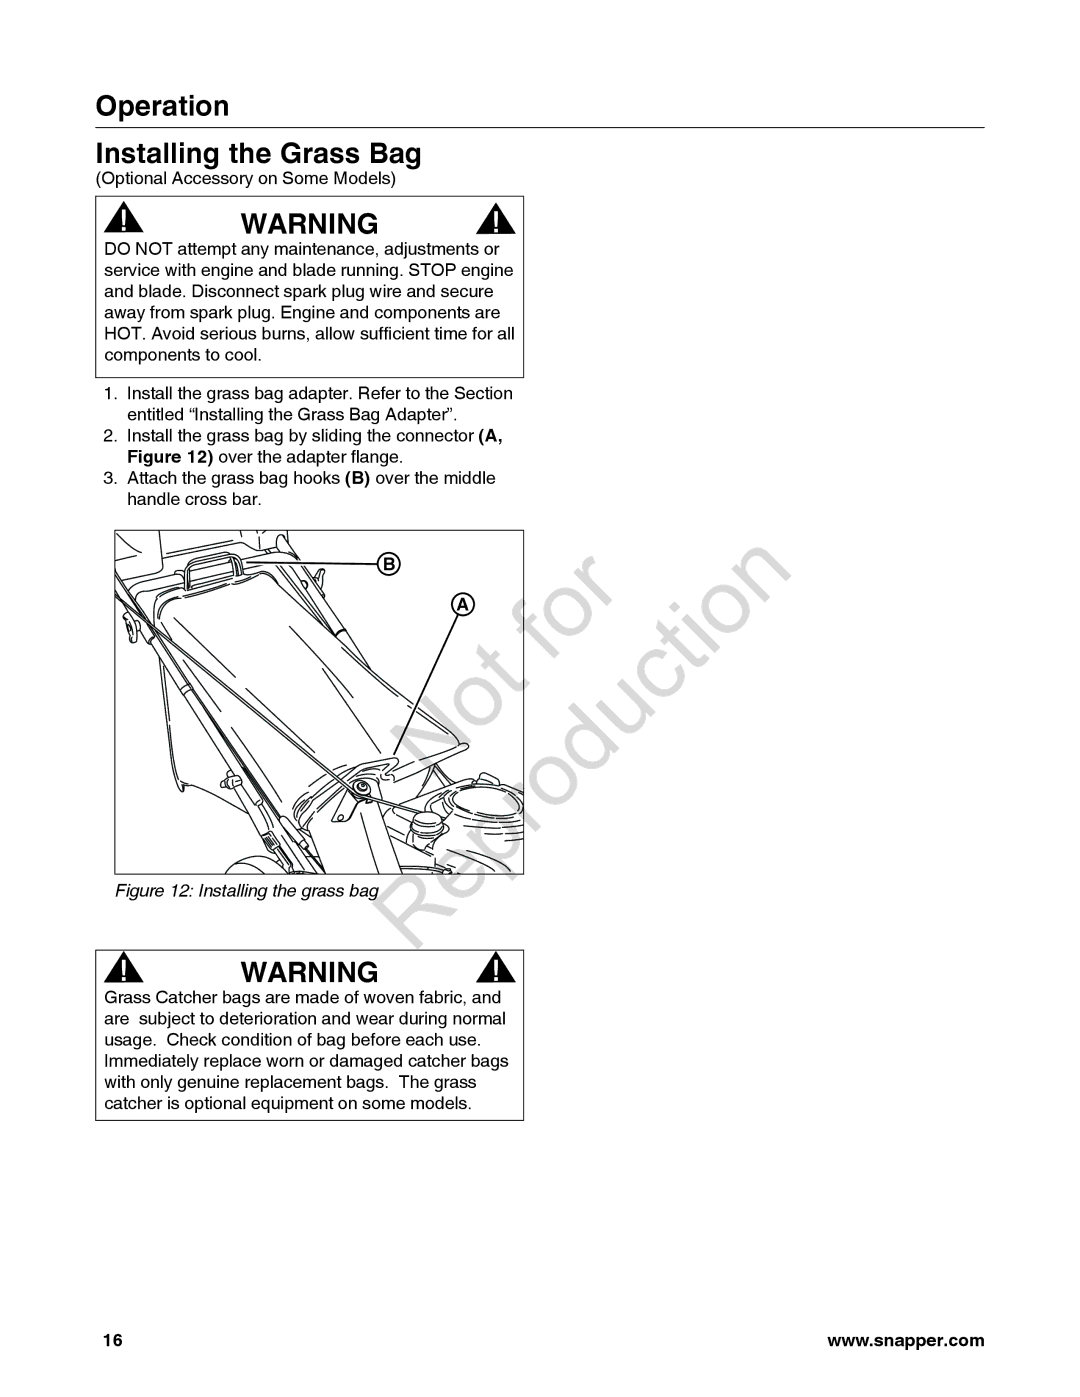 Snapper 780084-01, 7800841-01, 7800842-01 manual Not, Operation Installing the Grass Bag 